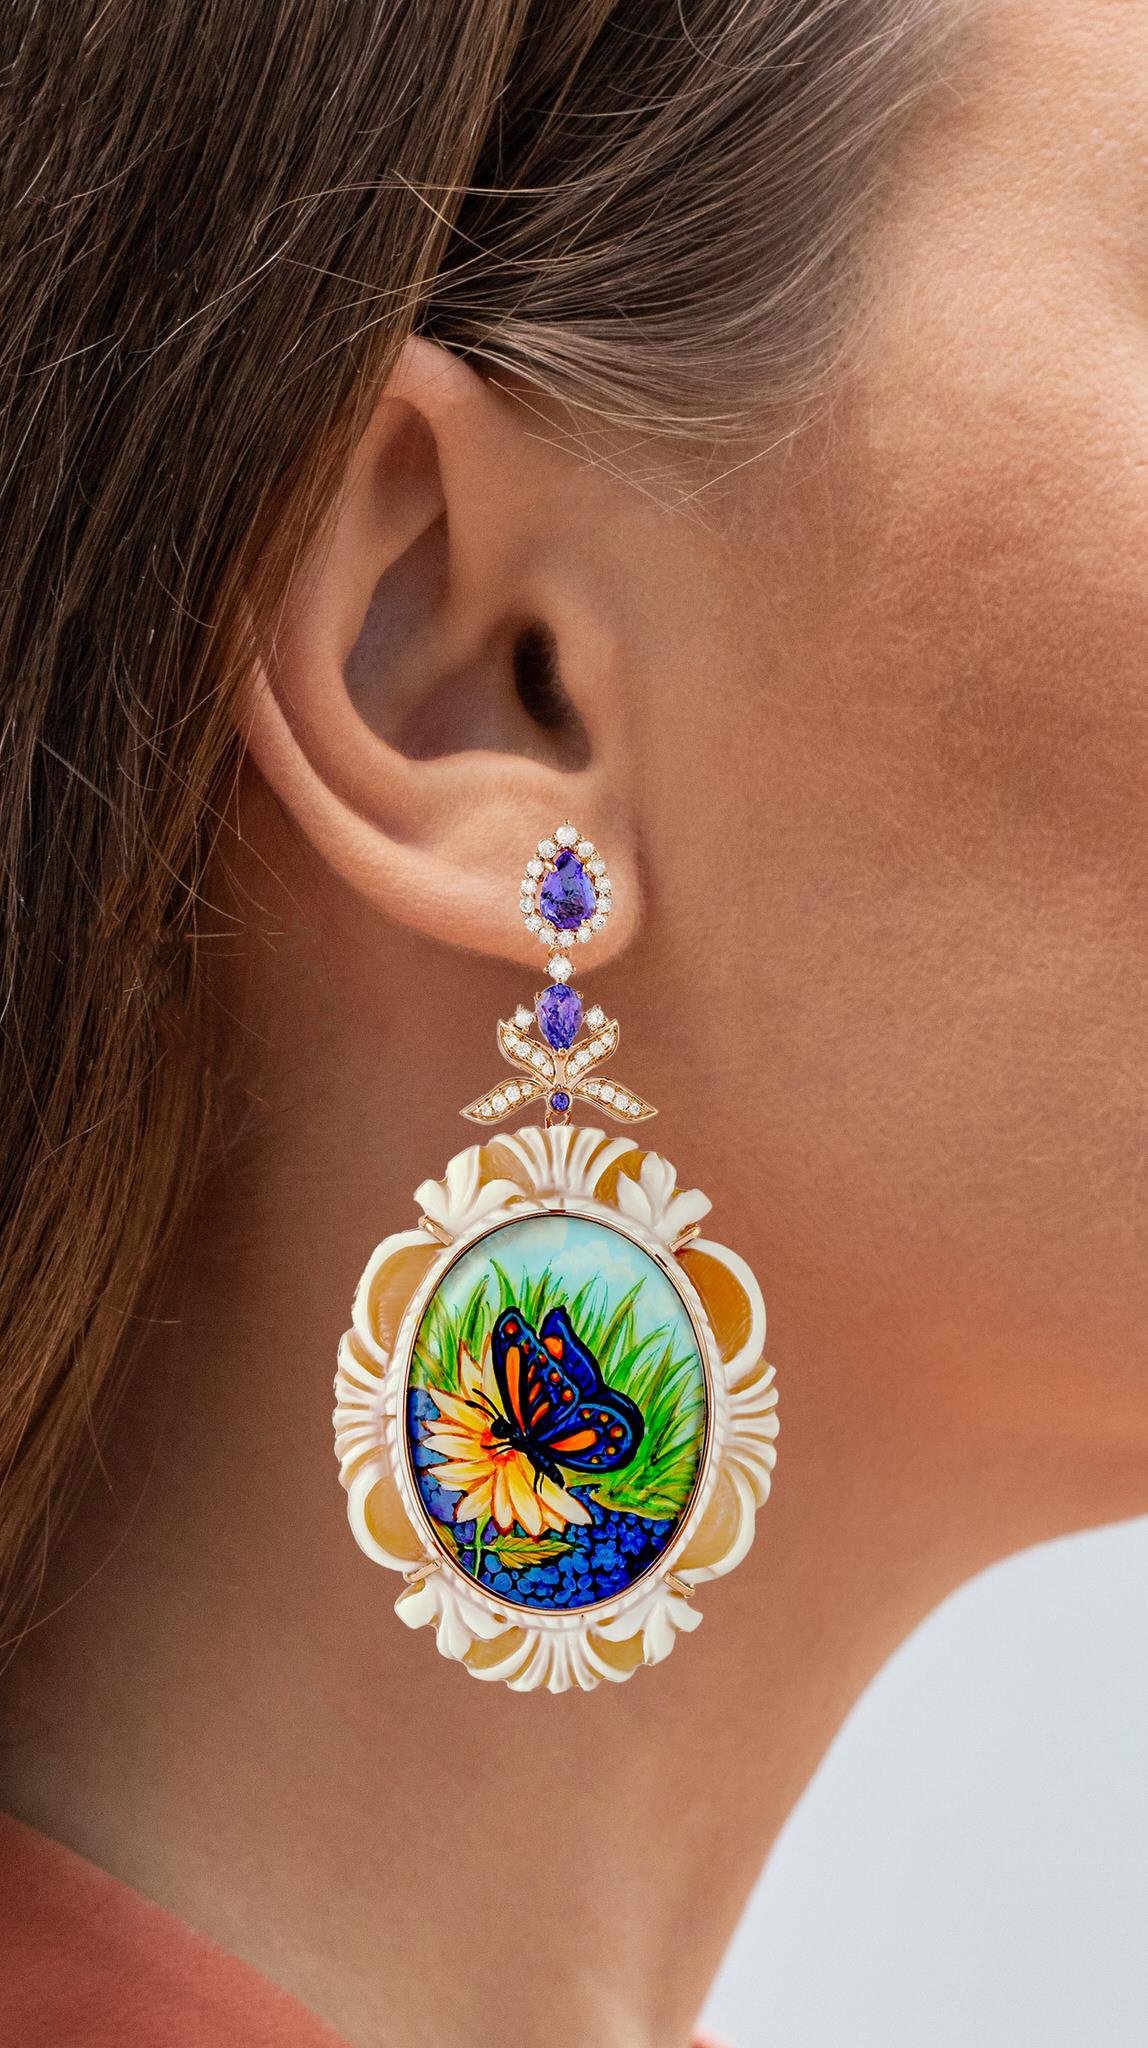 It comes with the Gemological Appraisal by GIA GG/AJP
All Gemstones are Natural
Carved Shell = 35.31 Carats
Tanzanites = 2.26 Carats
Diamonds = 0.82 Carats
Metal: 18K Gold
Dimensions: 77 x 38 mm